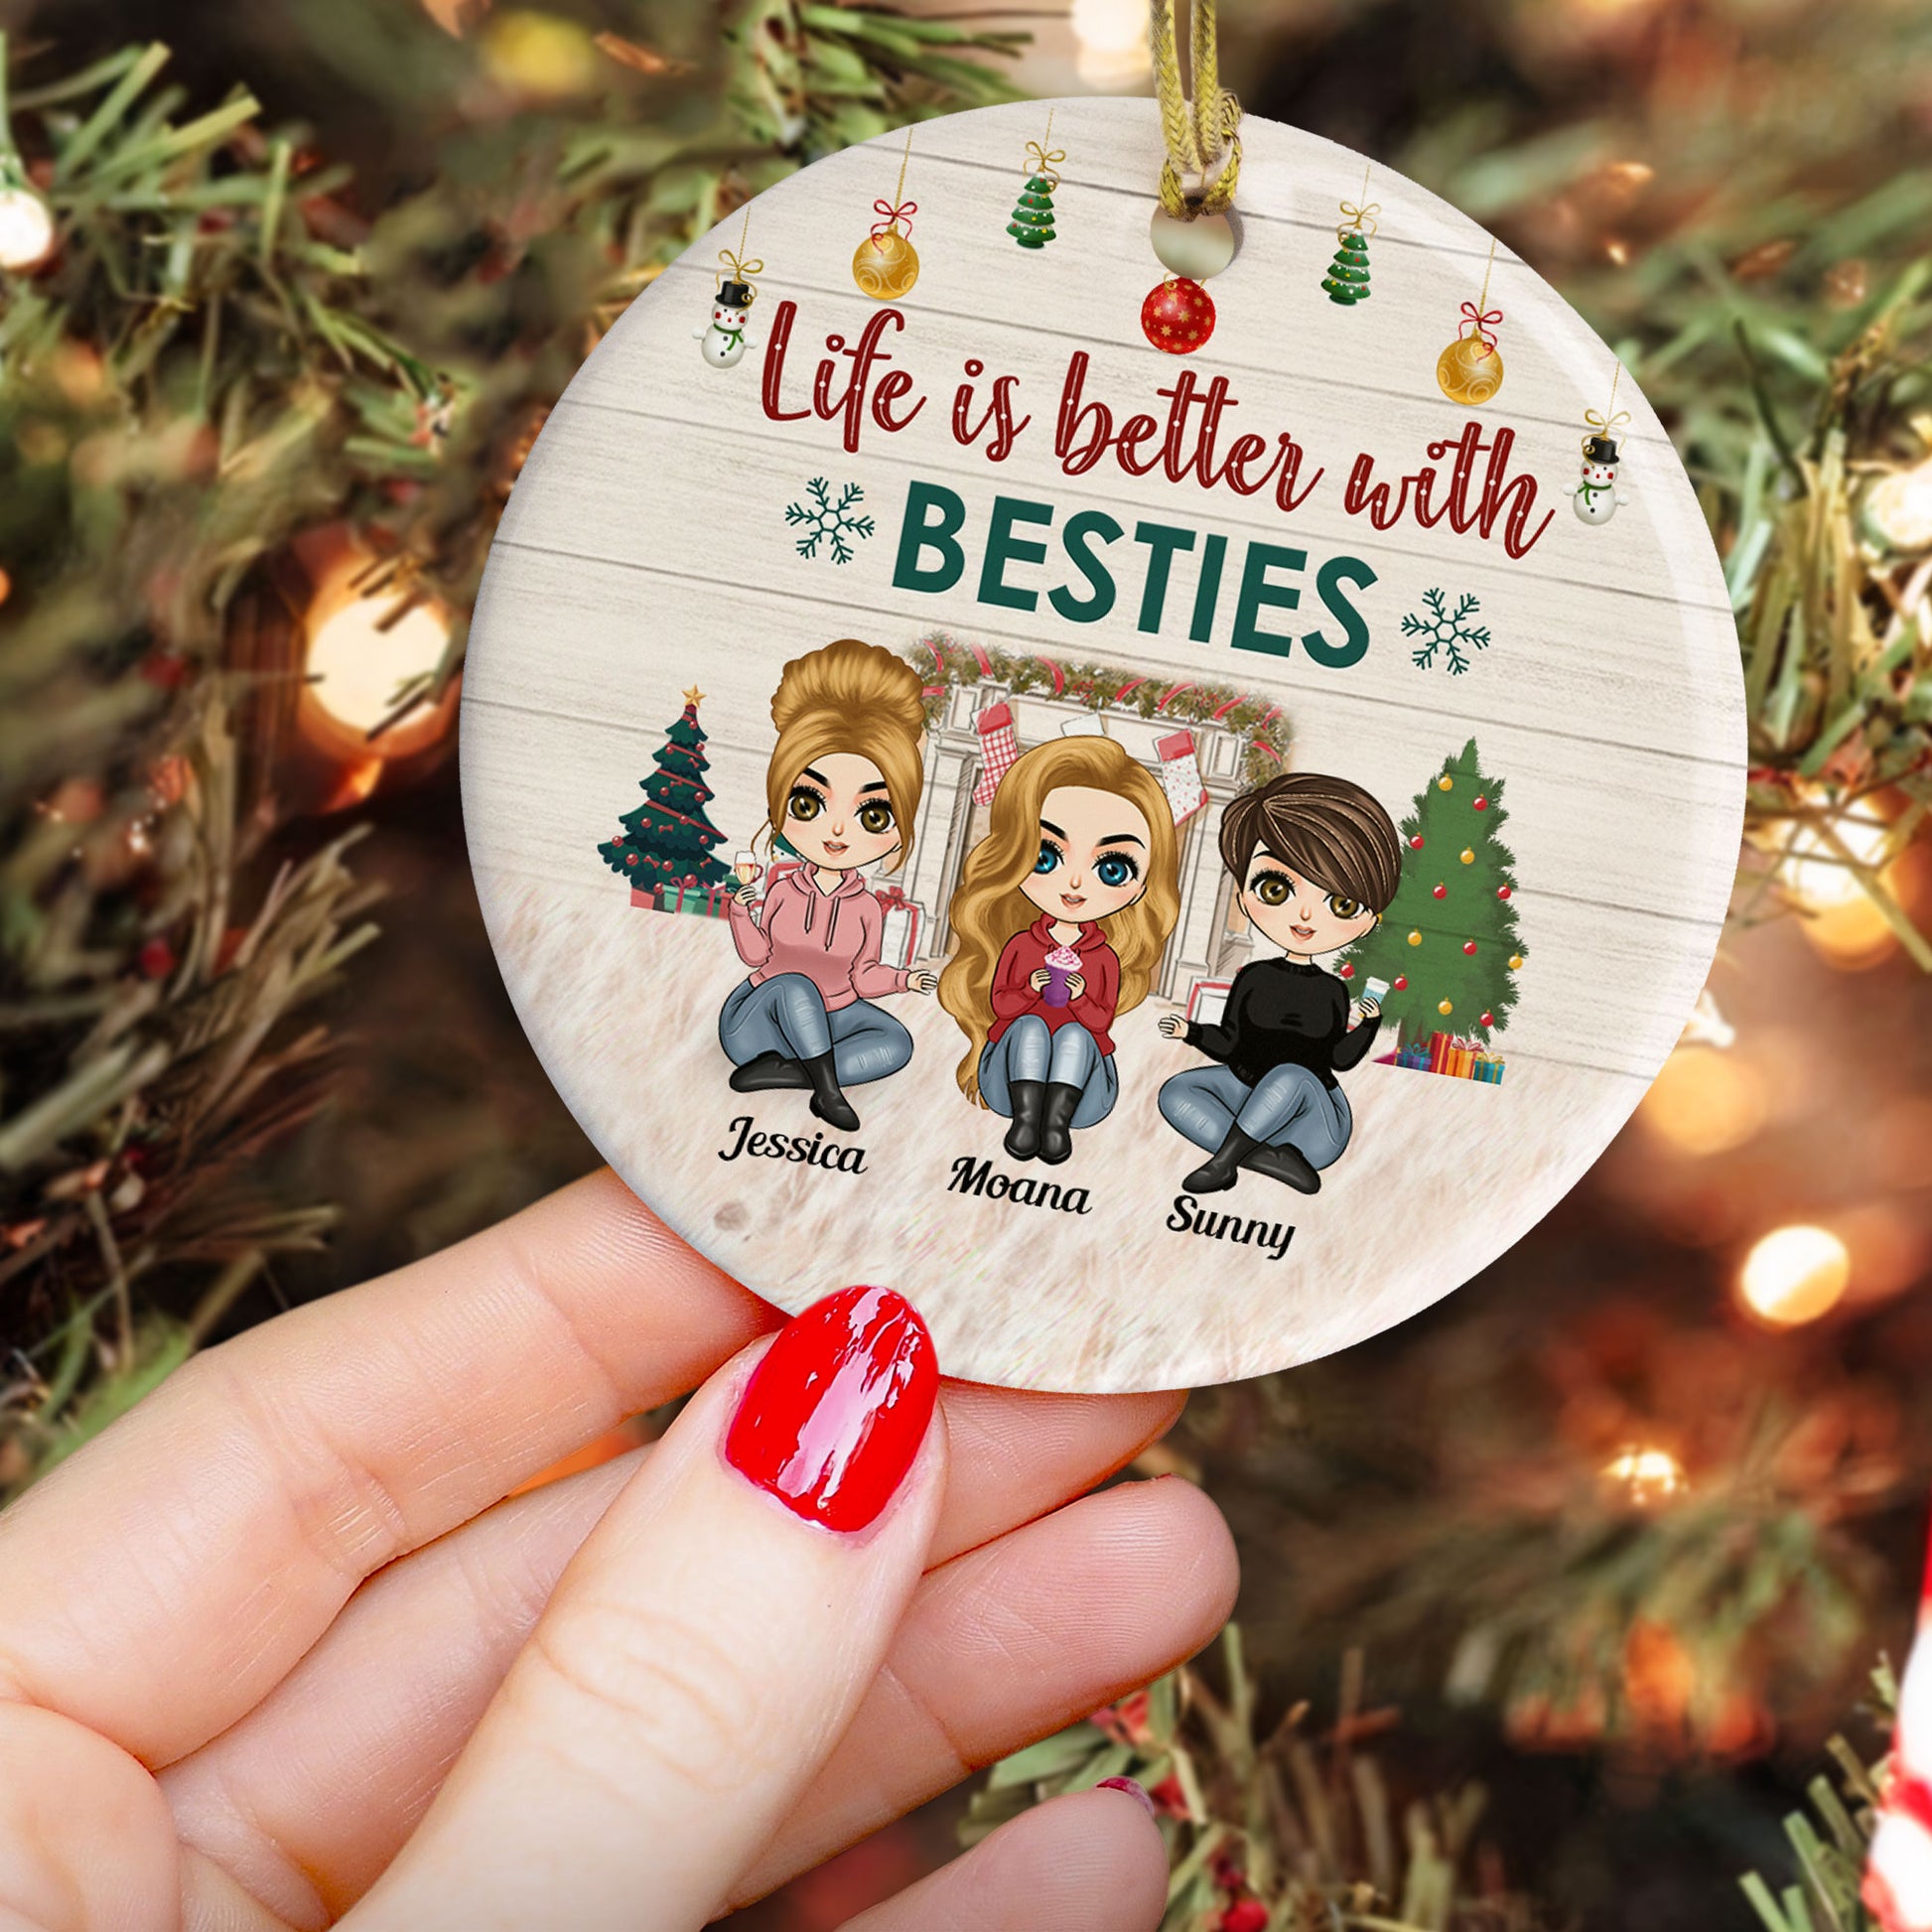 Life Is Better With Besties - Personalized Ceramic Ornament - Christmas Gift For BFF, Best Friends, Besties, Soul Sisters